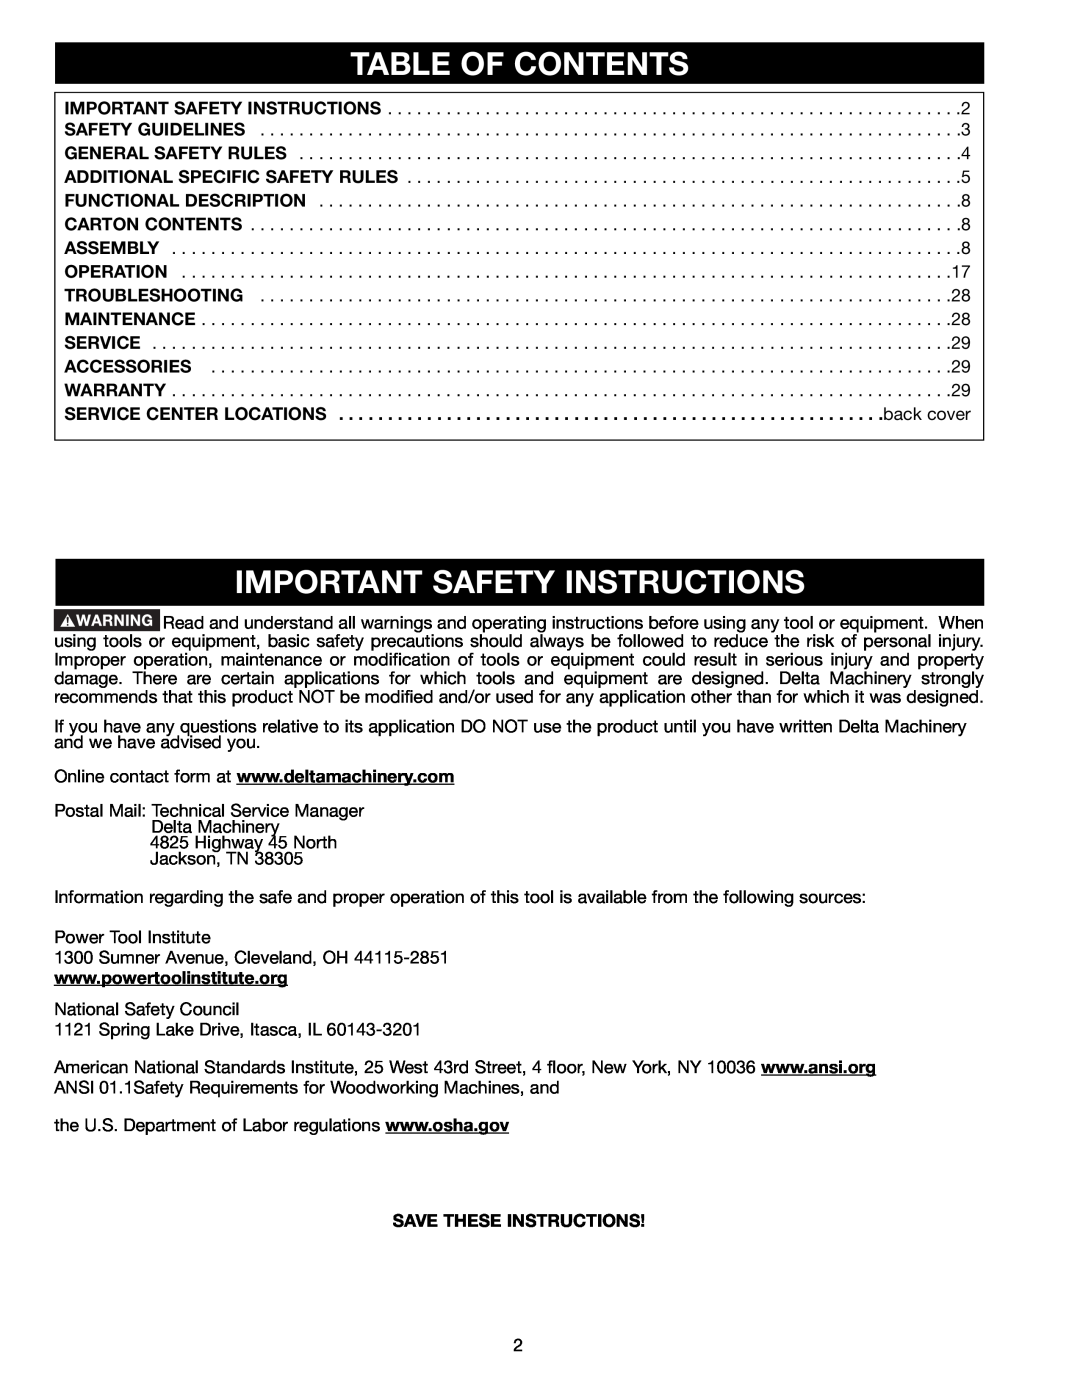 Porter-Cable 33-891, 33-892, 33-890 Table Of Contents, Important Safety Instructions, back cover, Save These Instructions 